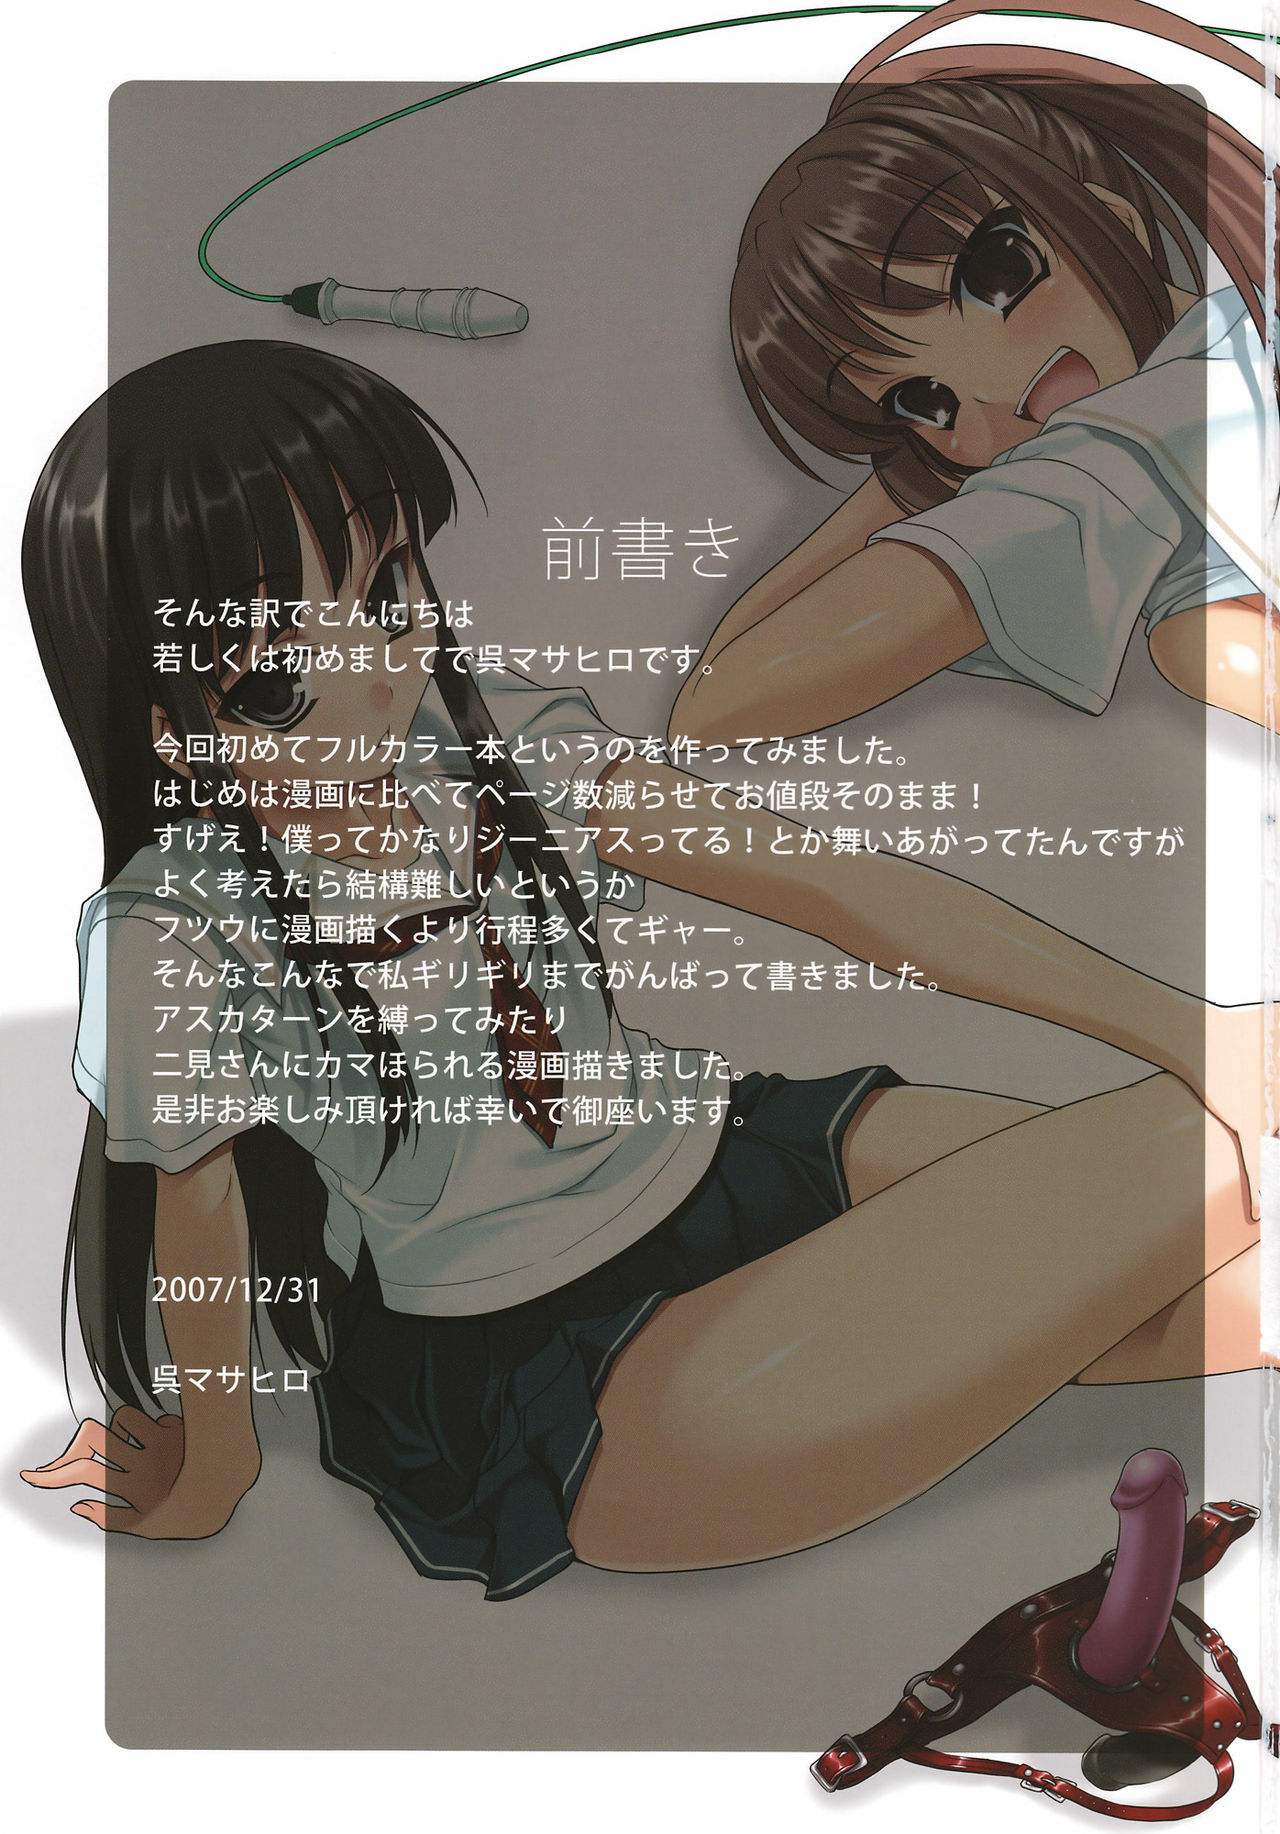 (C73) [etcycle (Cle Masahiro)] CL-orz'1 (KiMiKiSS) [Chinese] [柒樱汉化] page 3 full